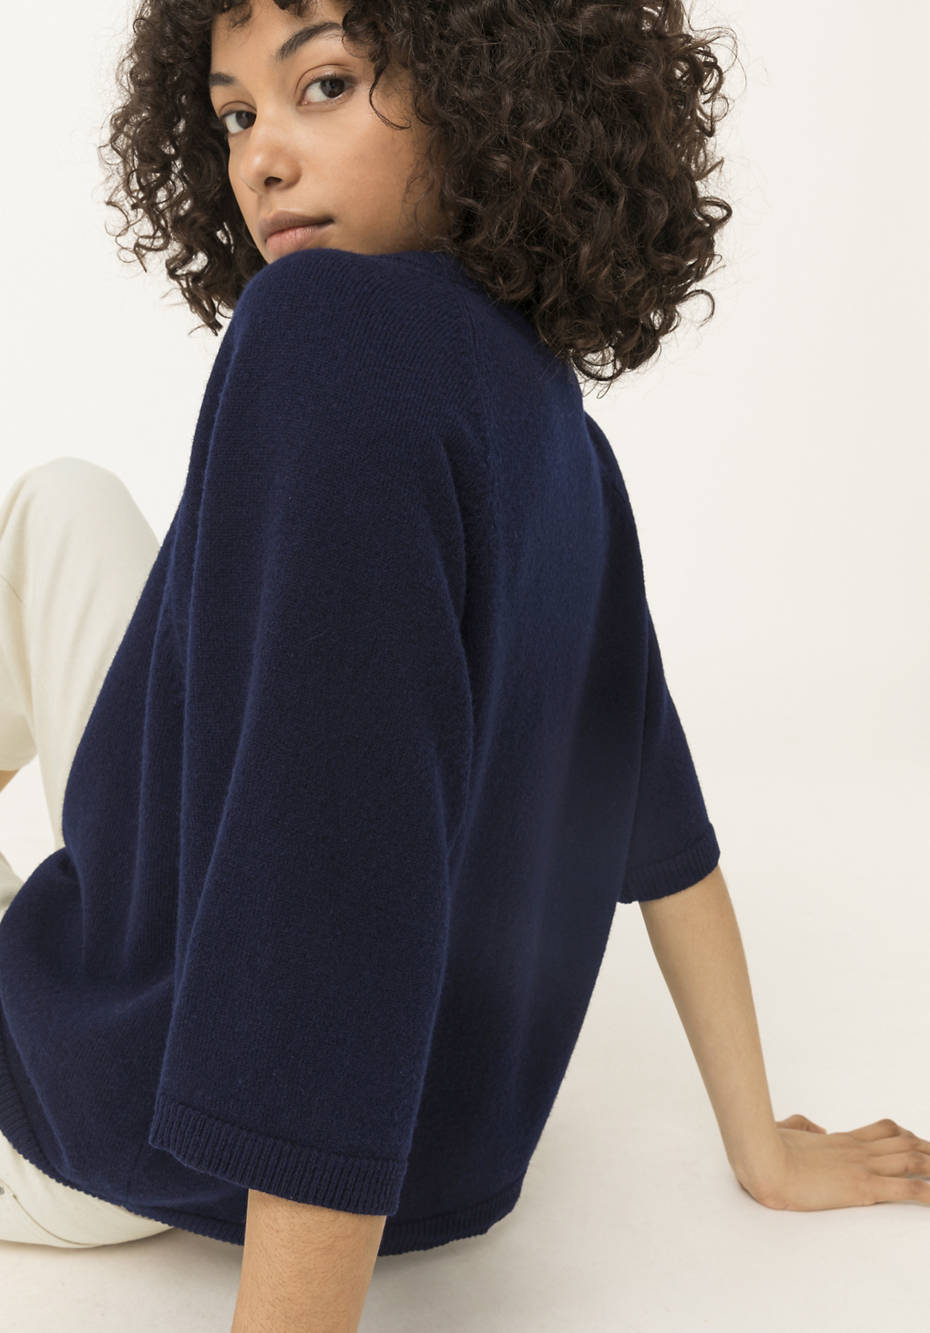 Half-sleeved sweater made from pure organic lambswool